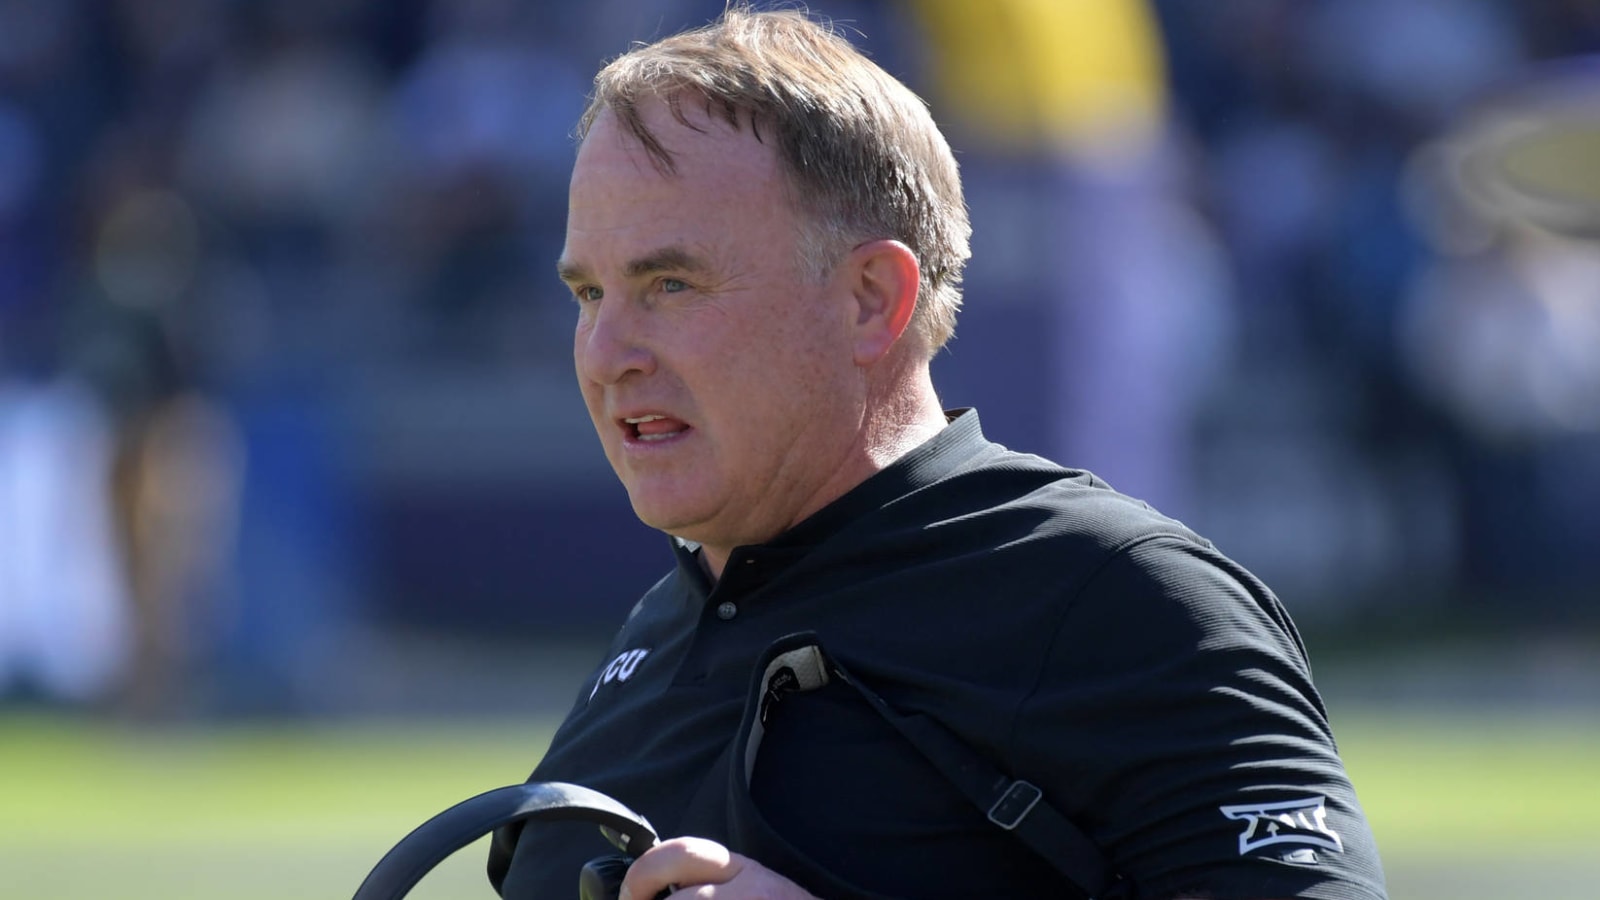 TCU coach Gary Patterson apologizes for repeating racial slur